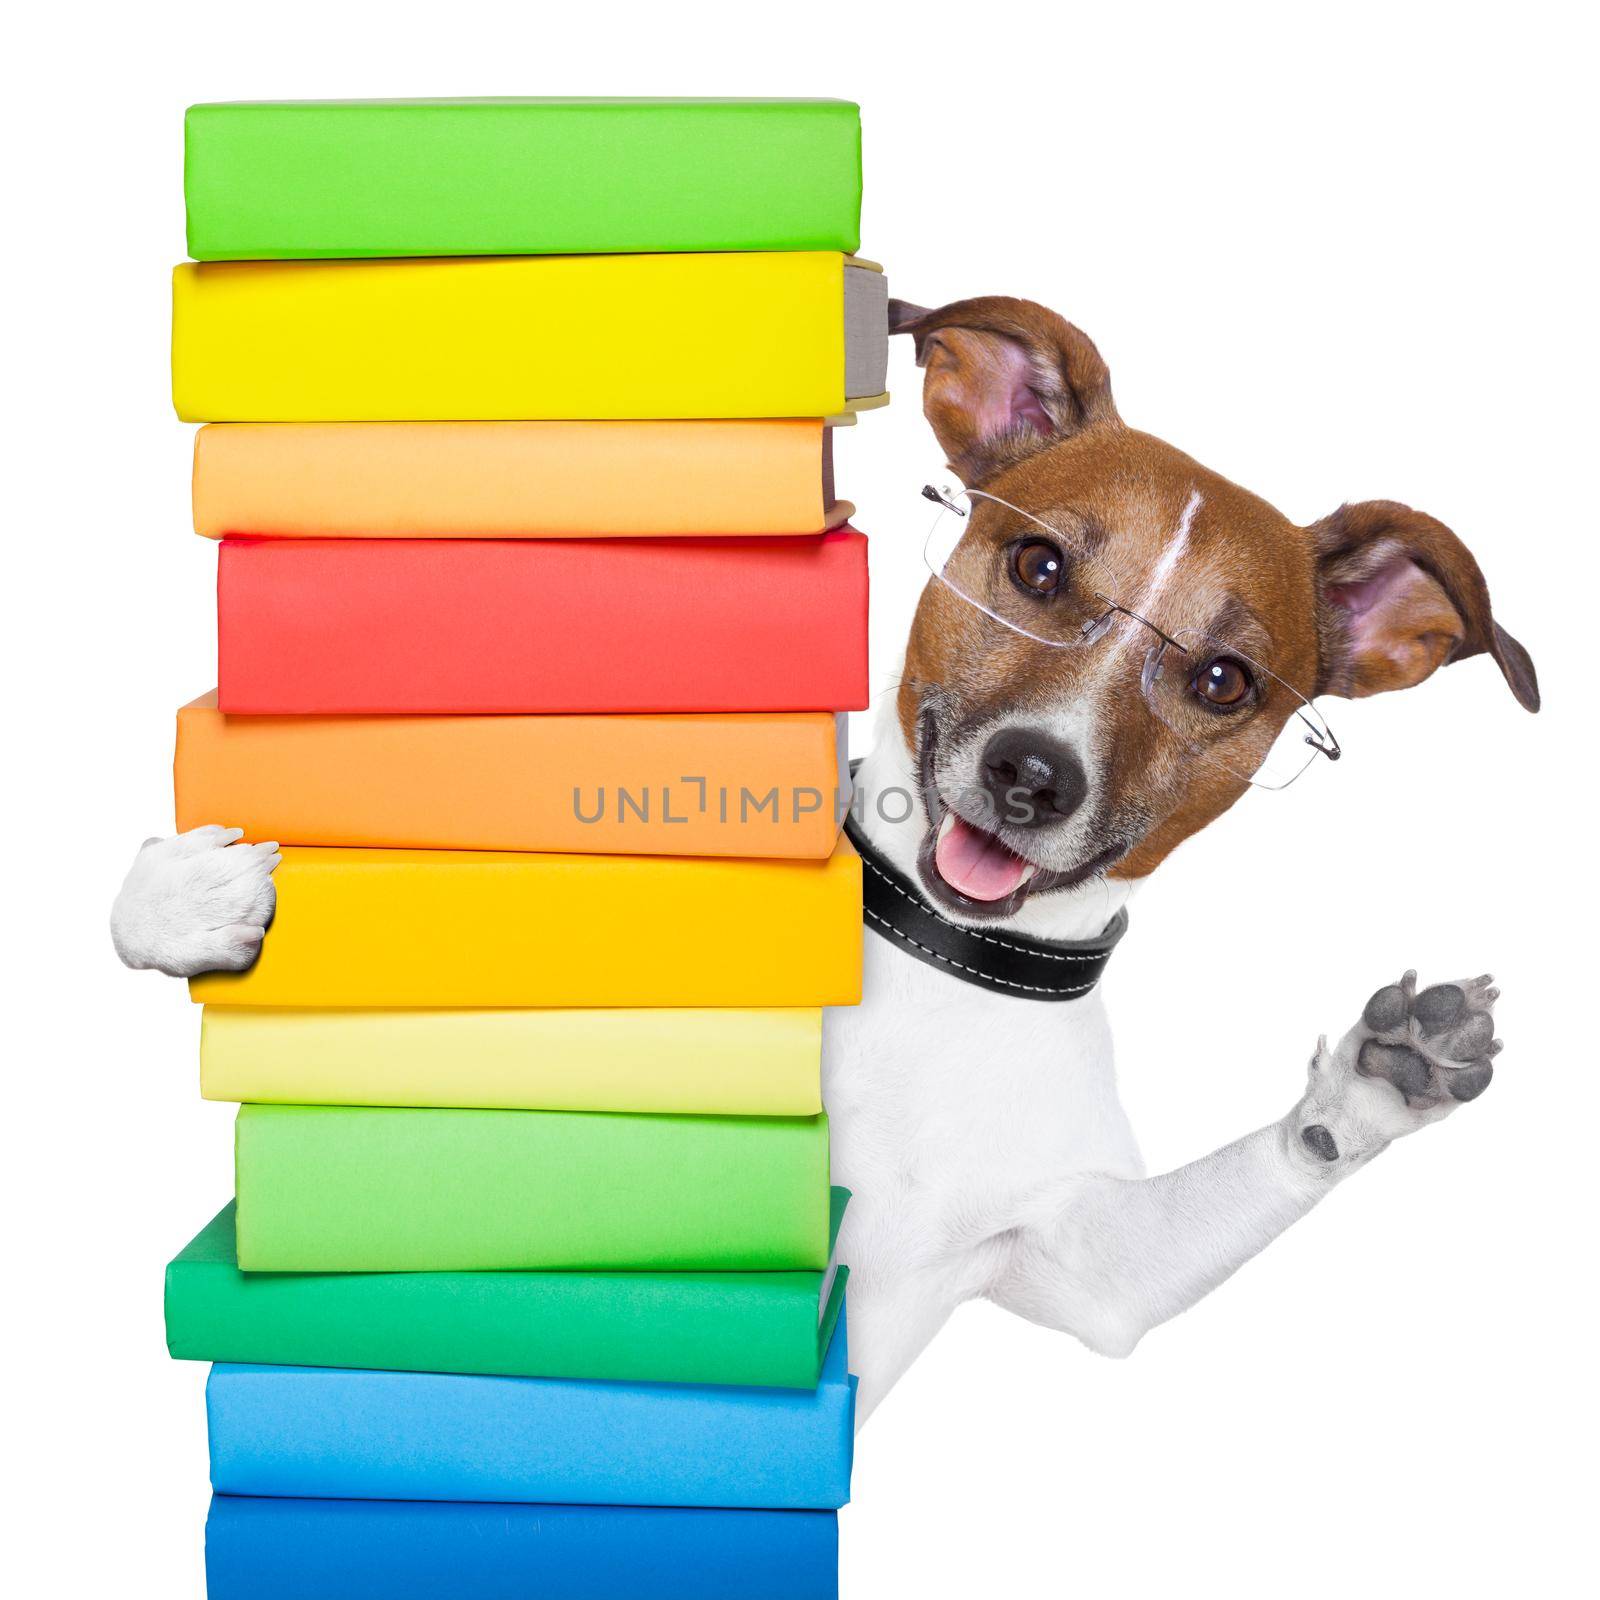 dog behind a tall stack of books